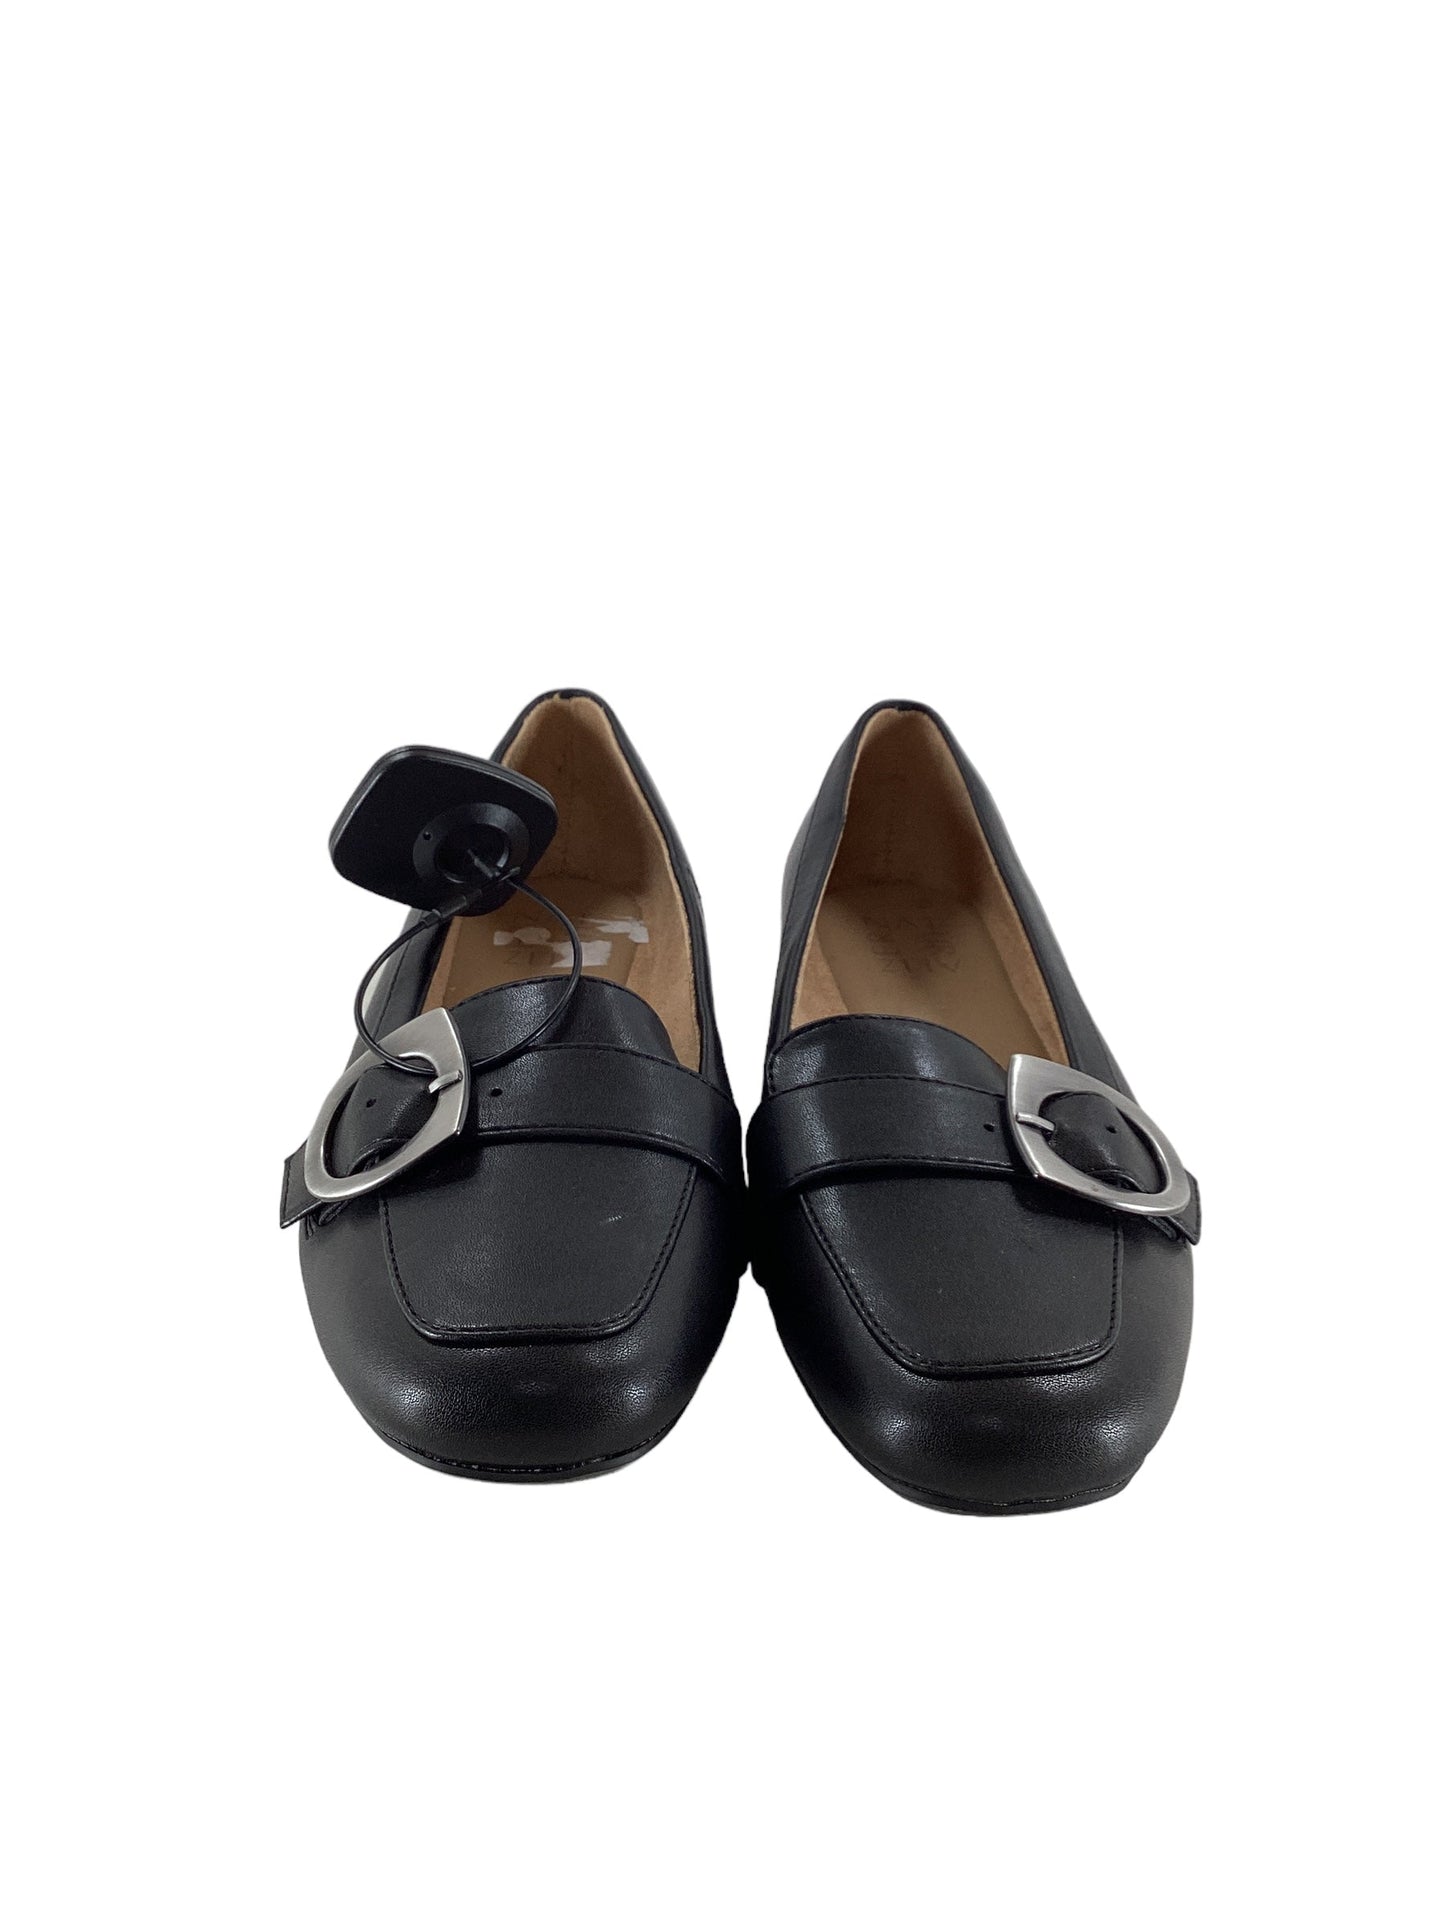 Shoes Flats By Naturalizer  Size: 7.5